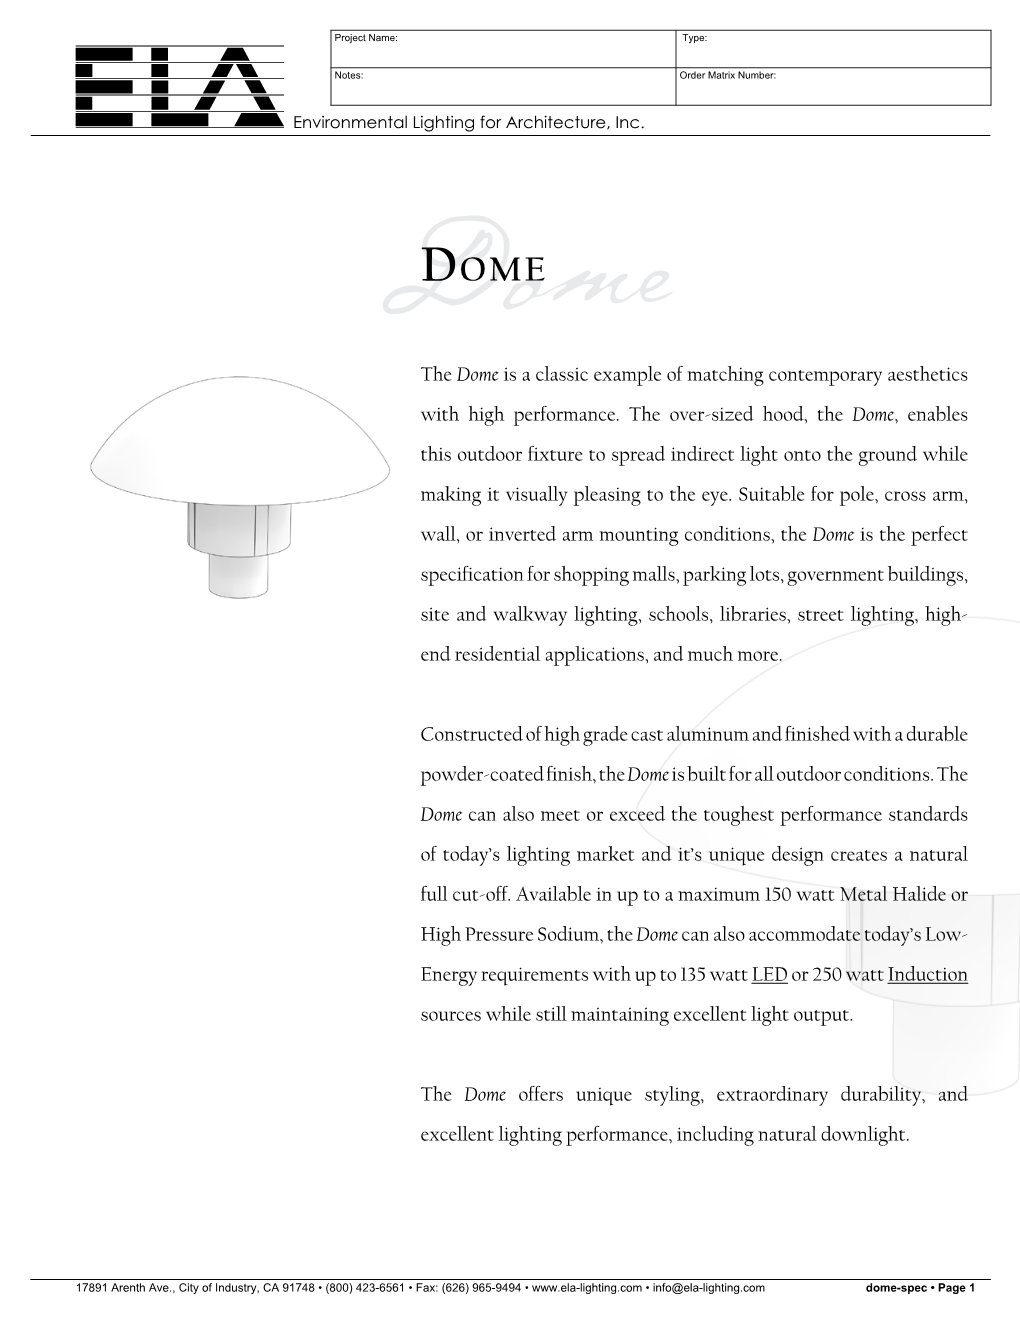 The Dome Is a Classic Example of Matching Contemporary Aesthetics with High Performance